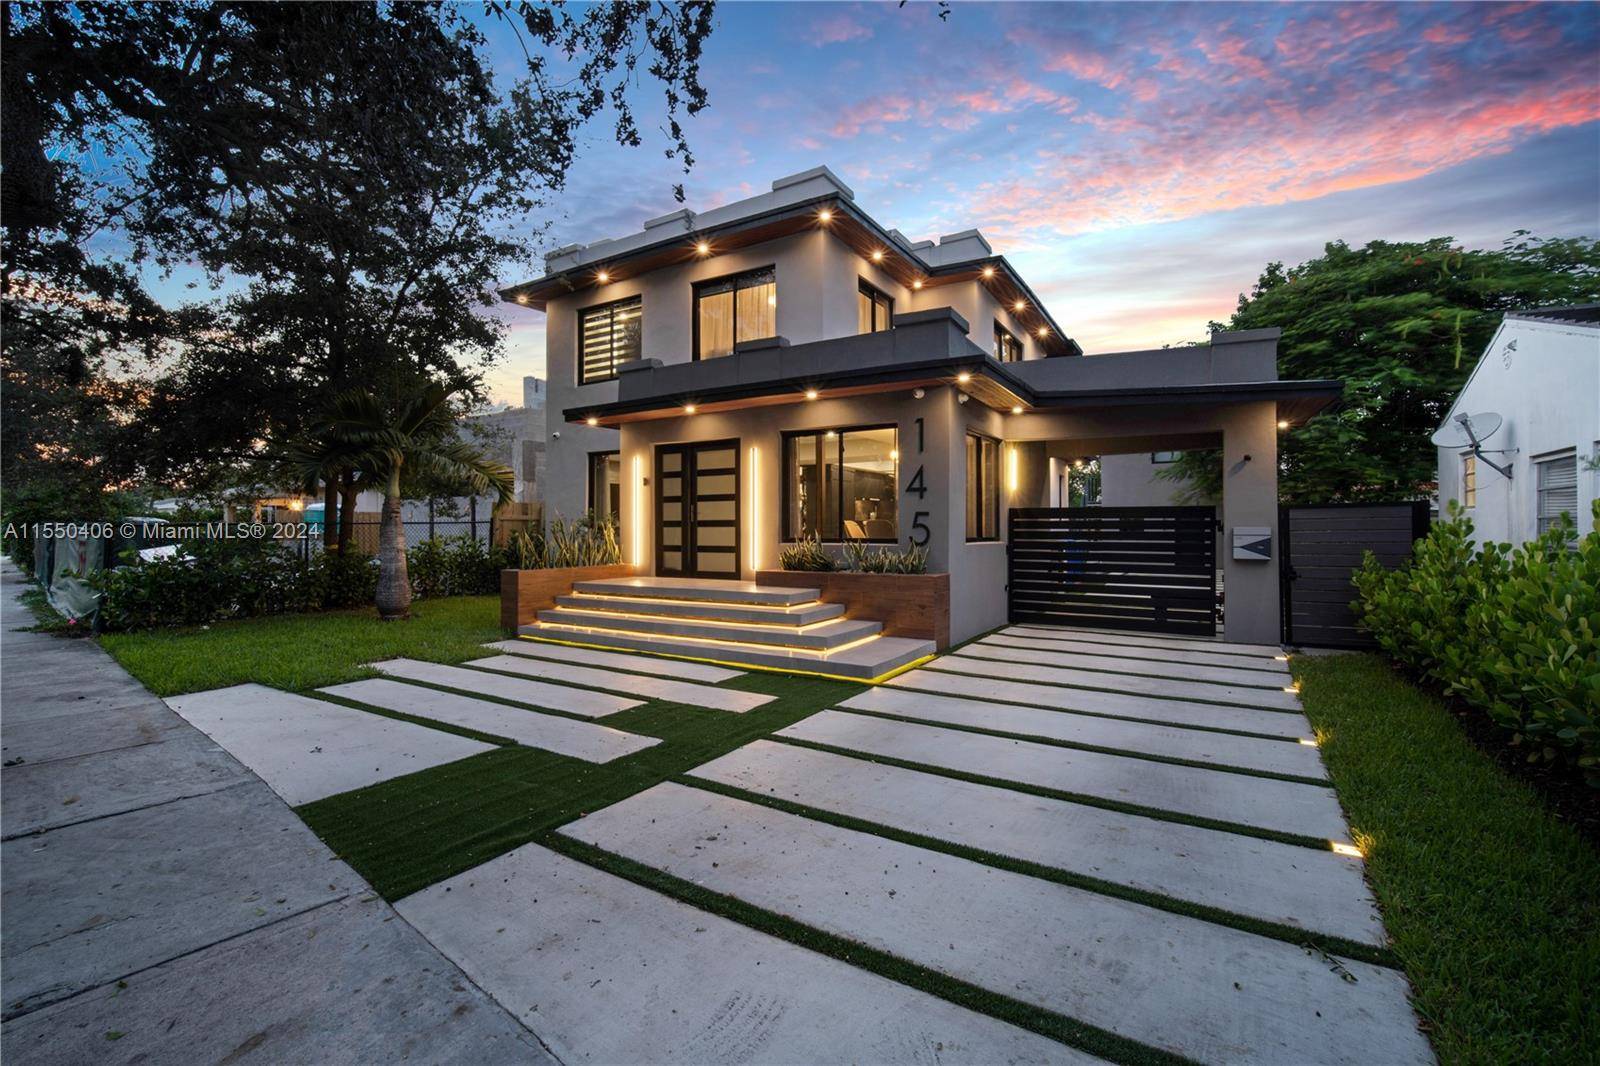 A true essence of design and luxury, this modern Buena Vista home has a two story separate residence and nearly 3, 300 Sqft of thought out stylish interior.